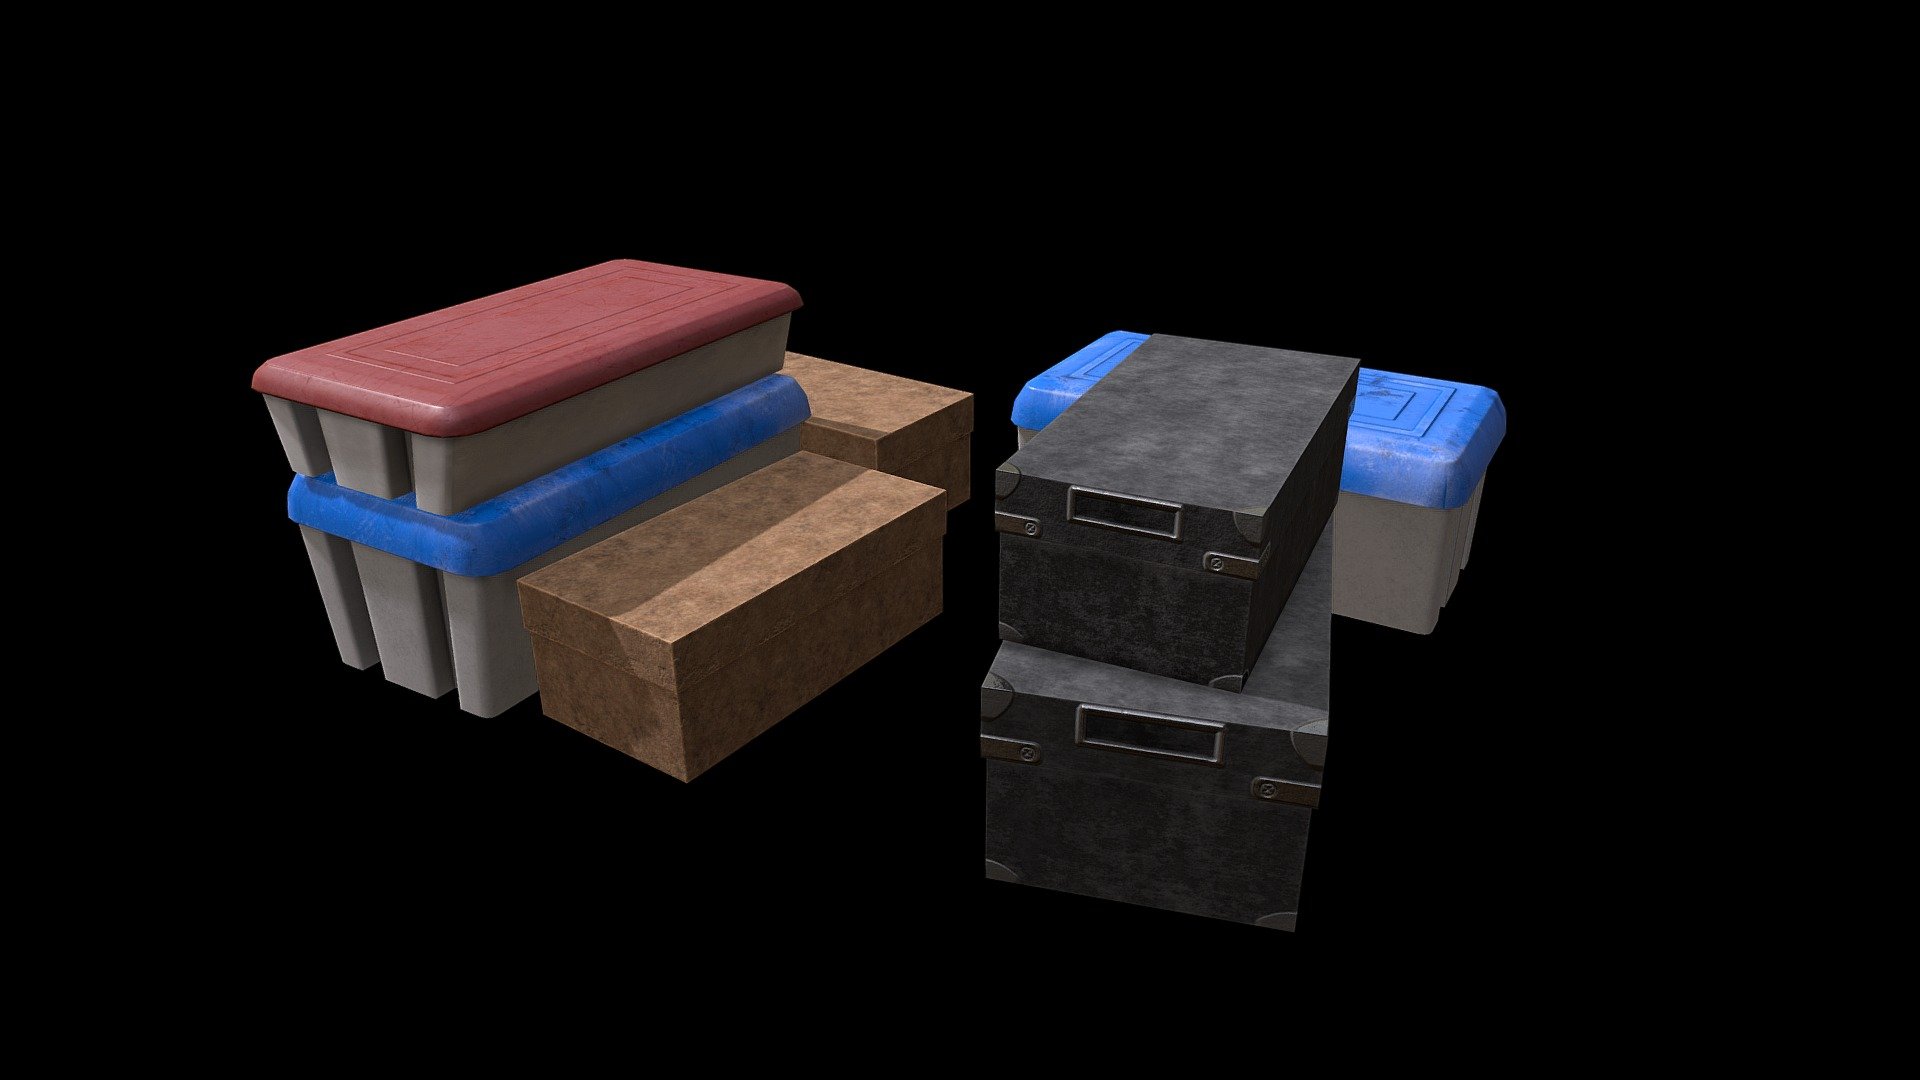 4 crate variations:

-Blue Big Plastic Crate
-Red Small Plastic Crate
-Small Brown Cardboard Box
-Black Office Box - Game Ready Crates & Boxes Pack - Buy Royalty Free 3D model by Handrews 3d model